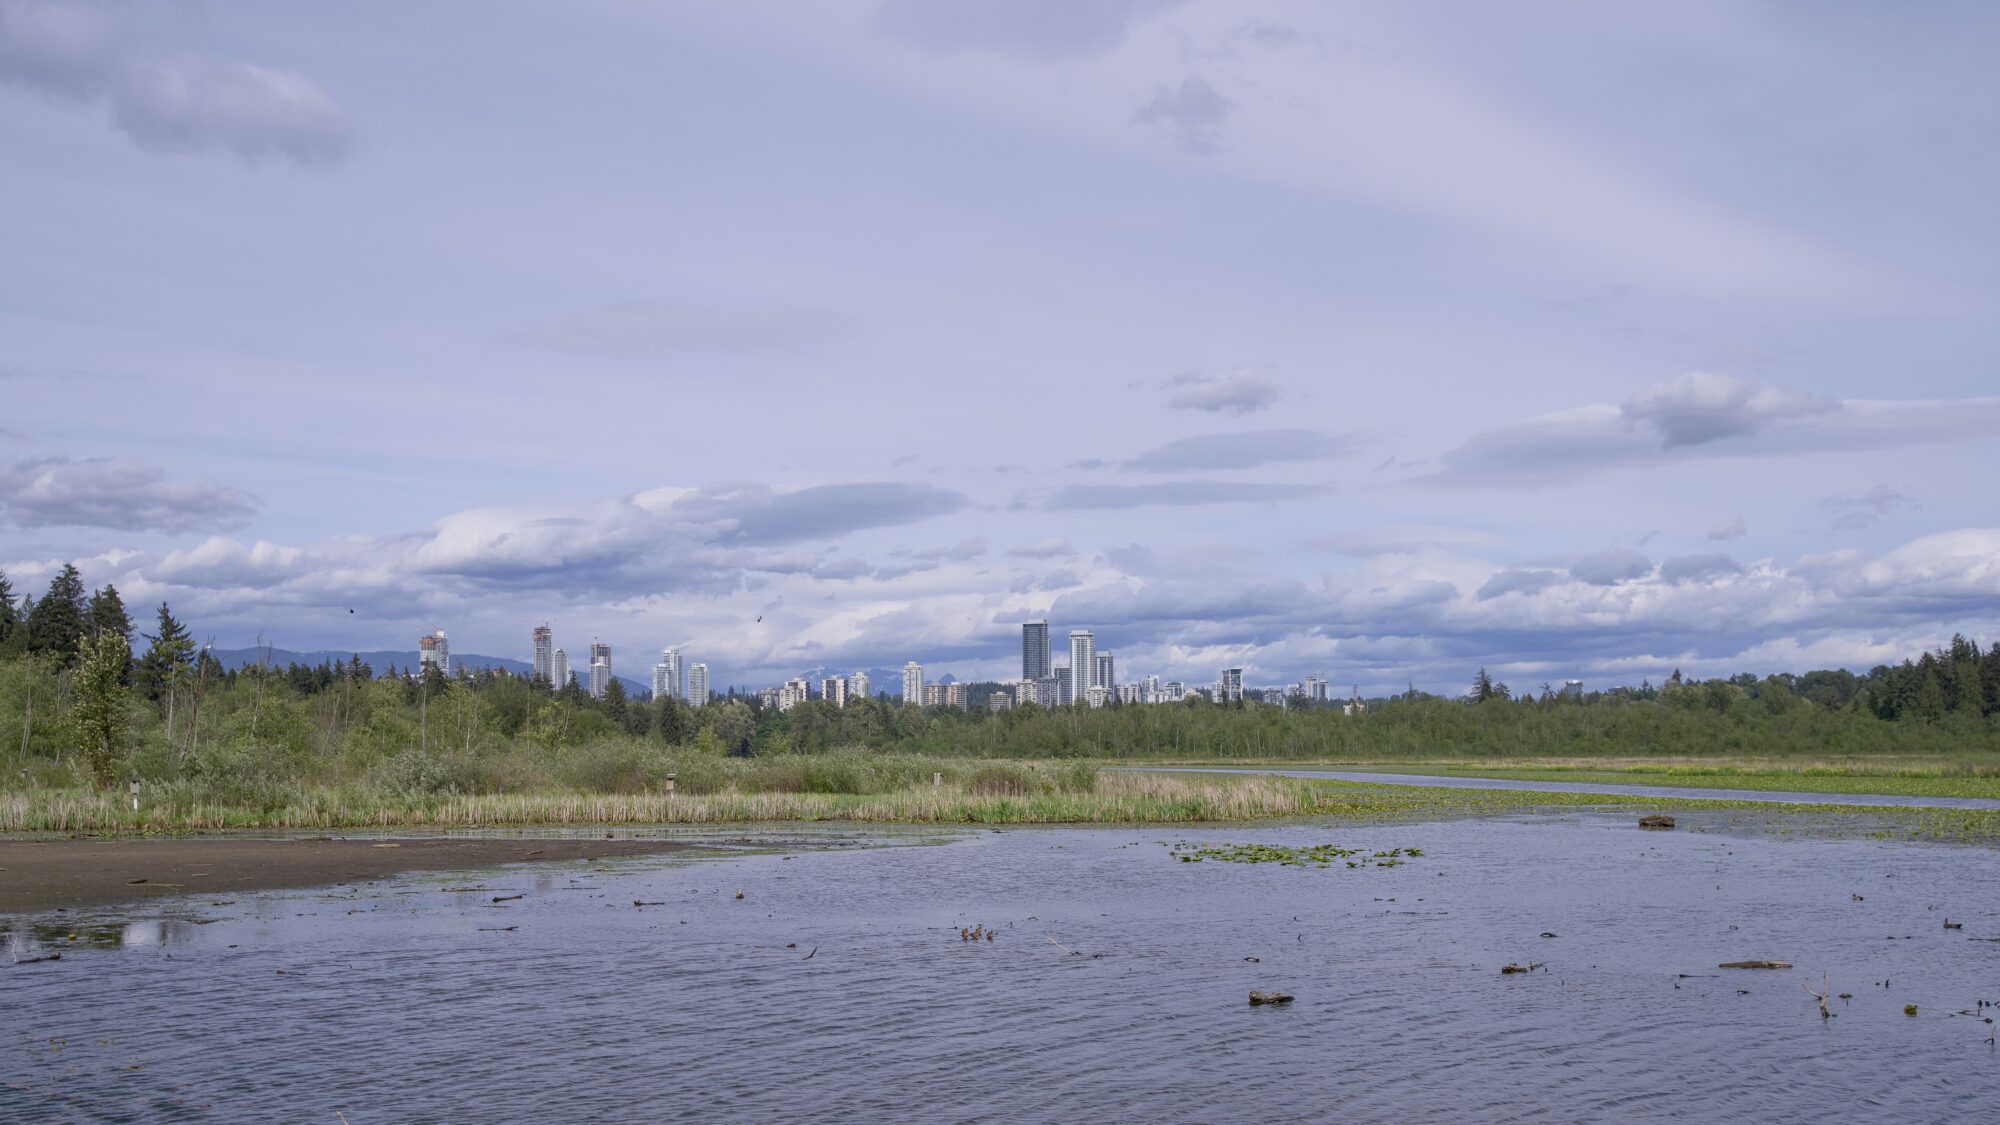 A wide-angle shot of Burnaby Lake, a shallow lake surrounded by reeds and trees. In the distance is a cluster of towers The sky is a bit cloudy